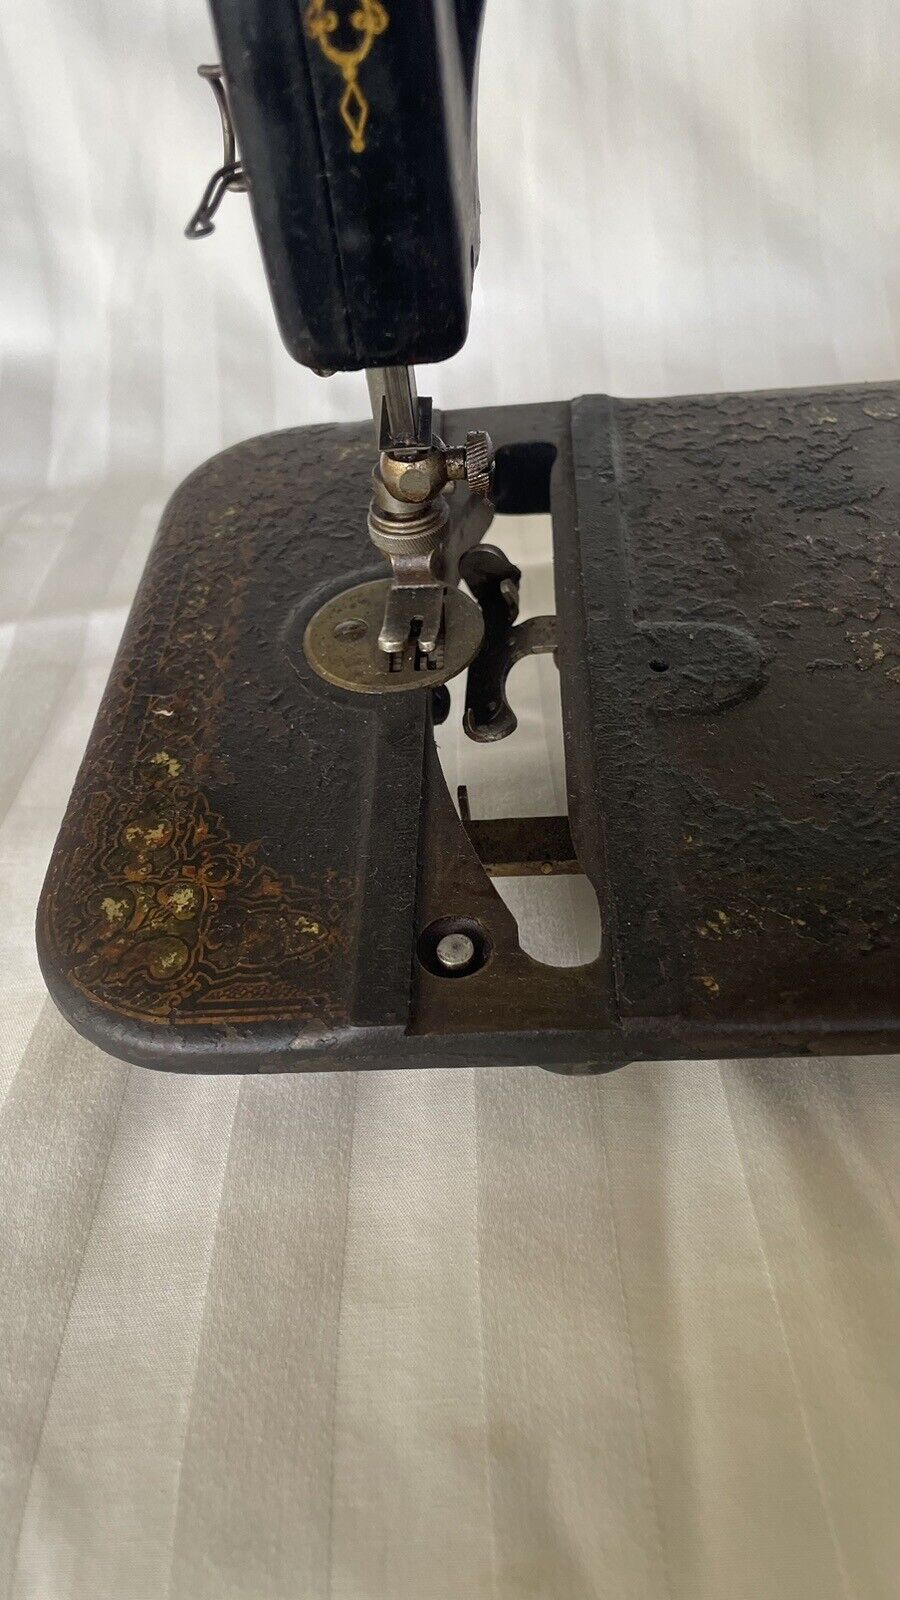 VINTAGE ANTIQUE  SEWING MACHINE  "NEW HOME"  NATIONAL A.M. CO